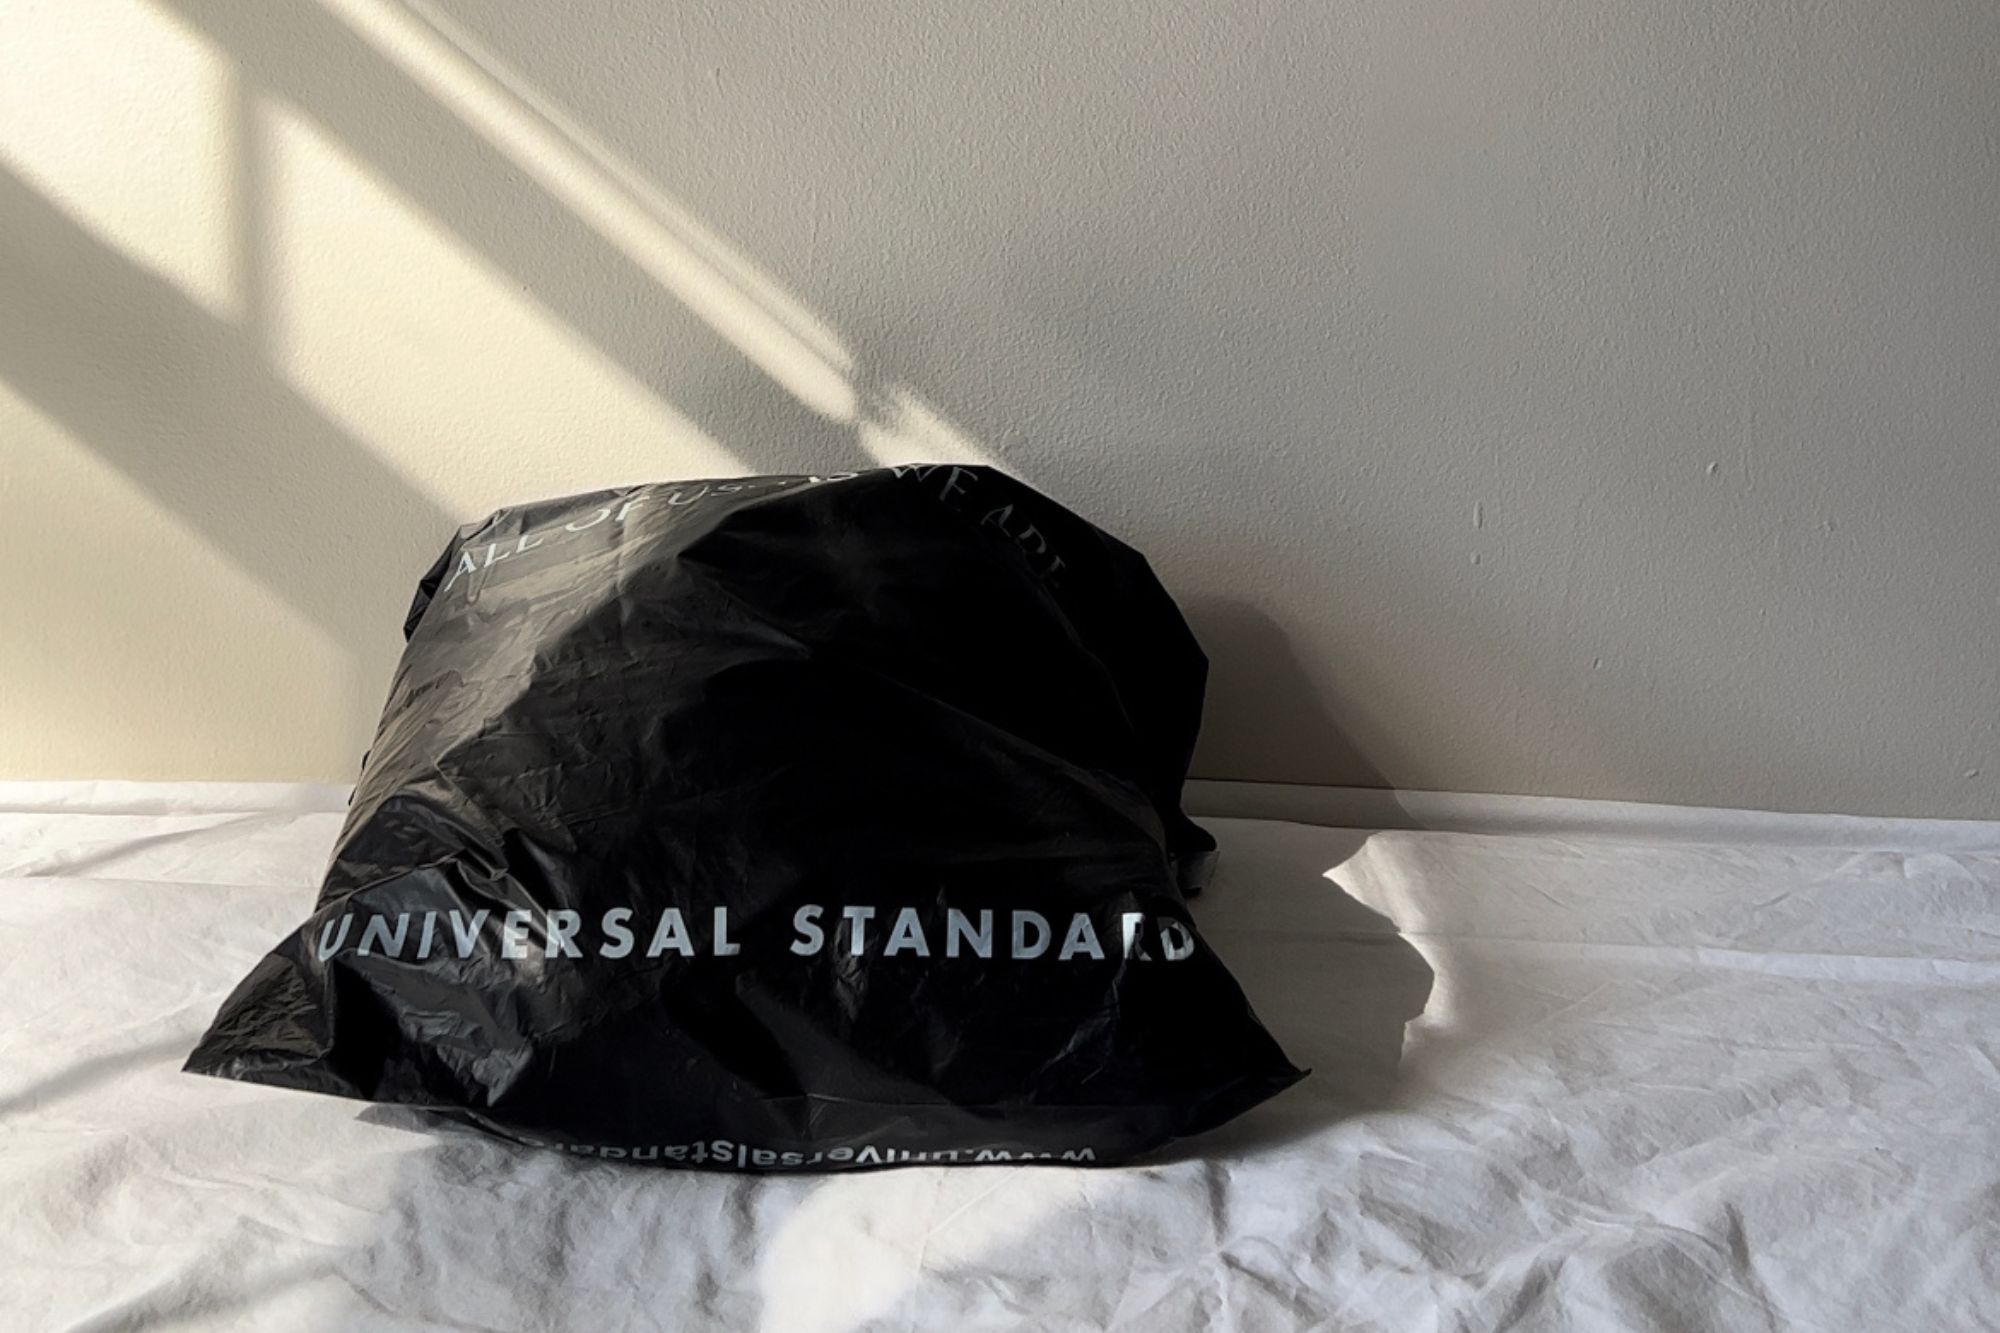 A Mystery Box package from Universal Standard